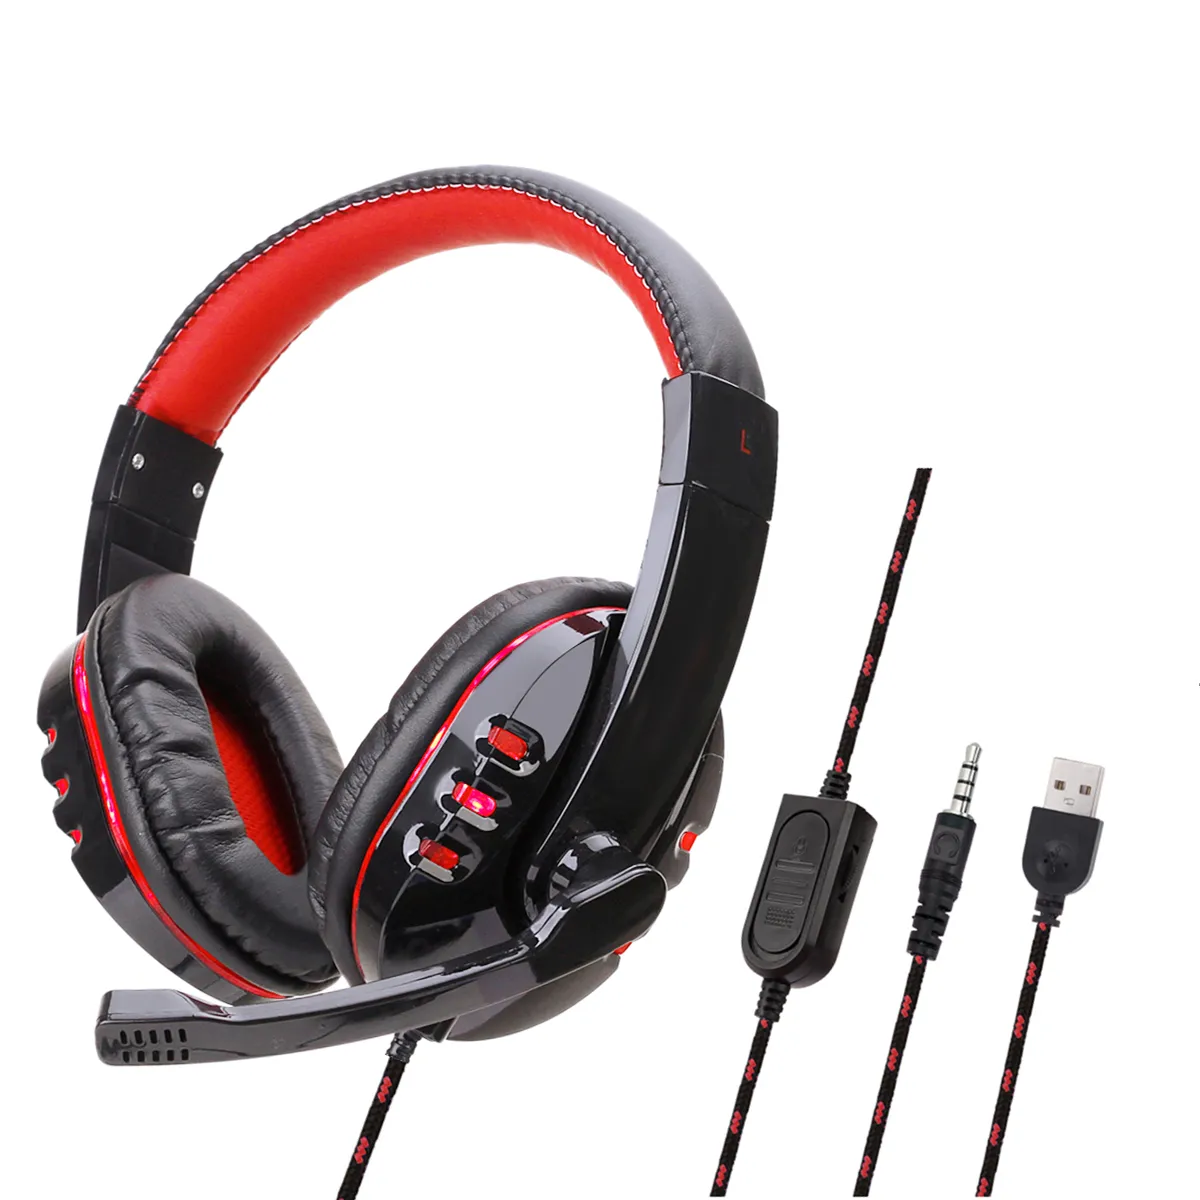 USB Wired Game Headphones With Microphones Gaming Headset 3.5mm Jack for PS4 PC Computer Laptop Mobile Phone